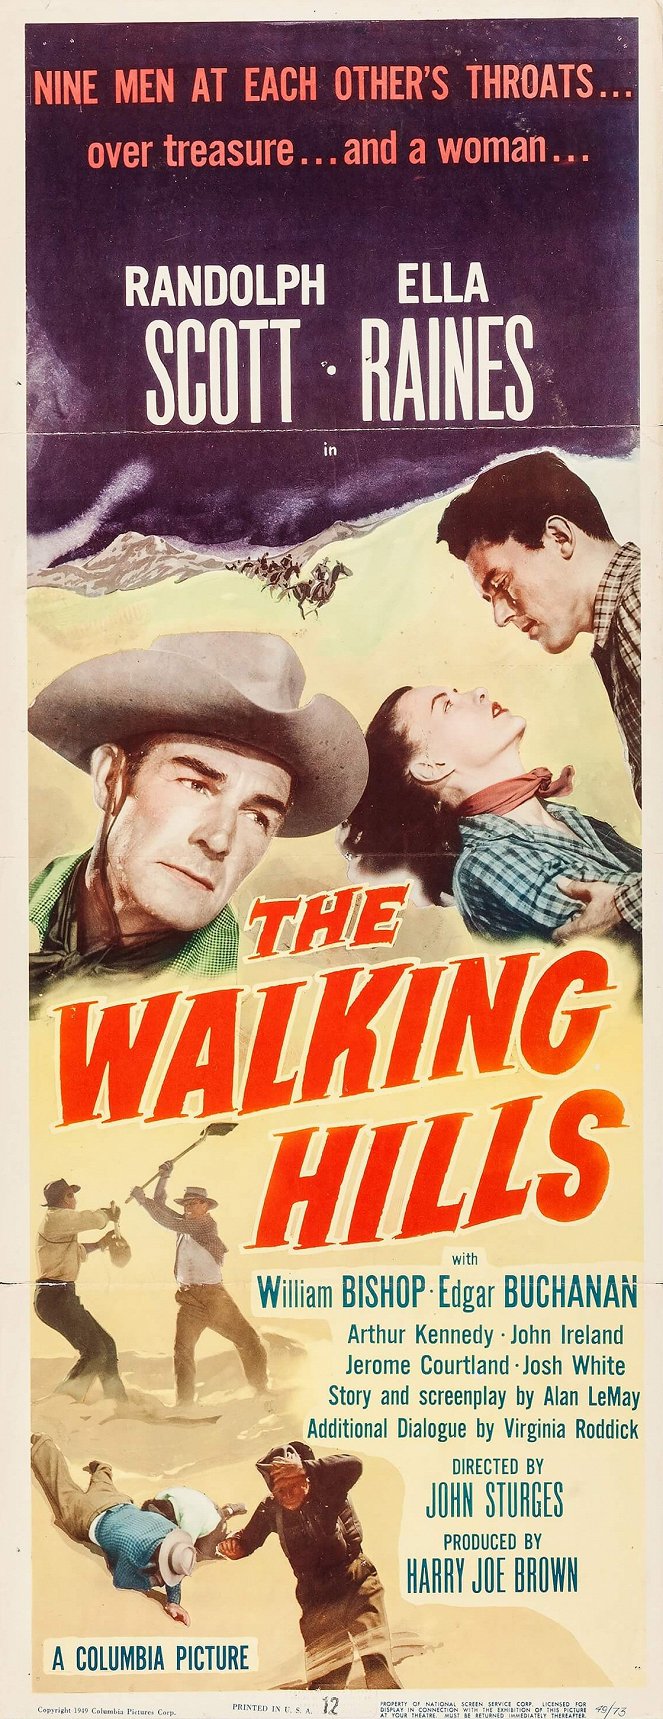 The Walking Hills - Posters